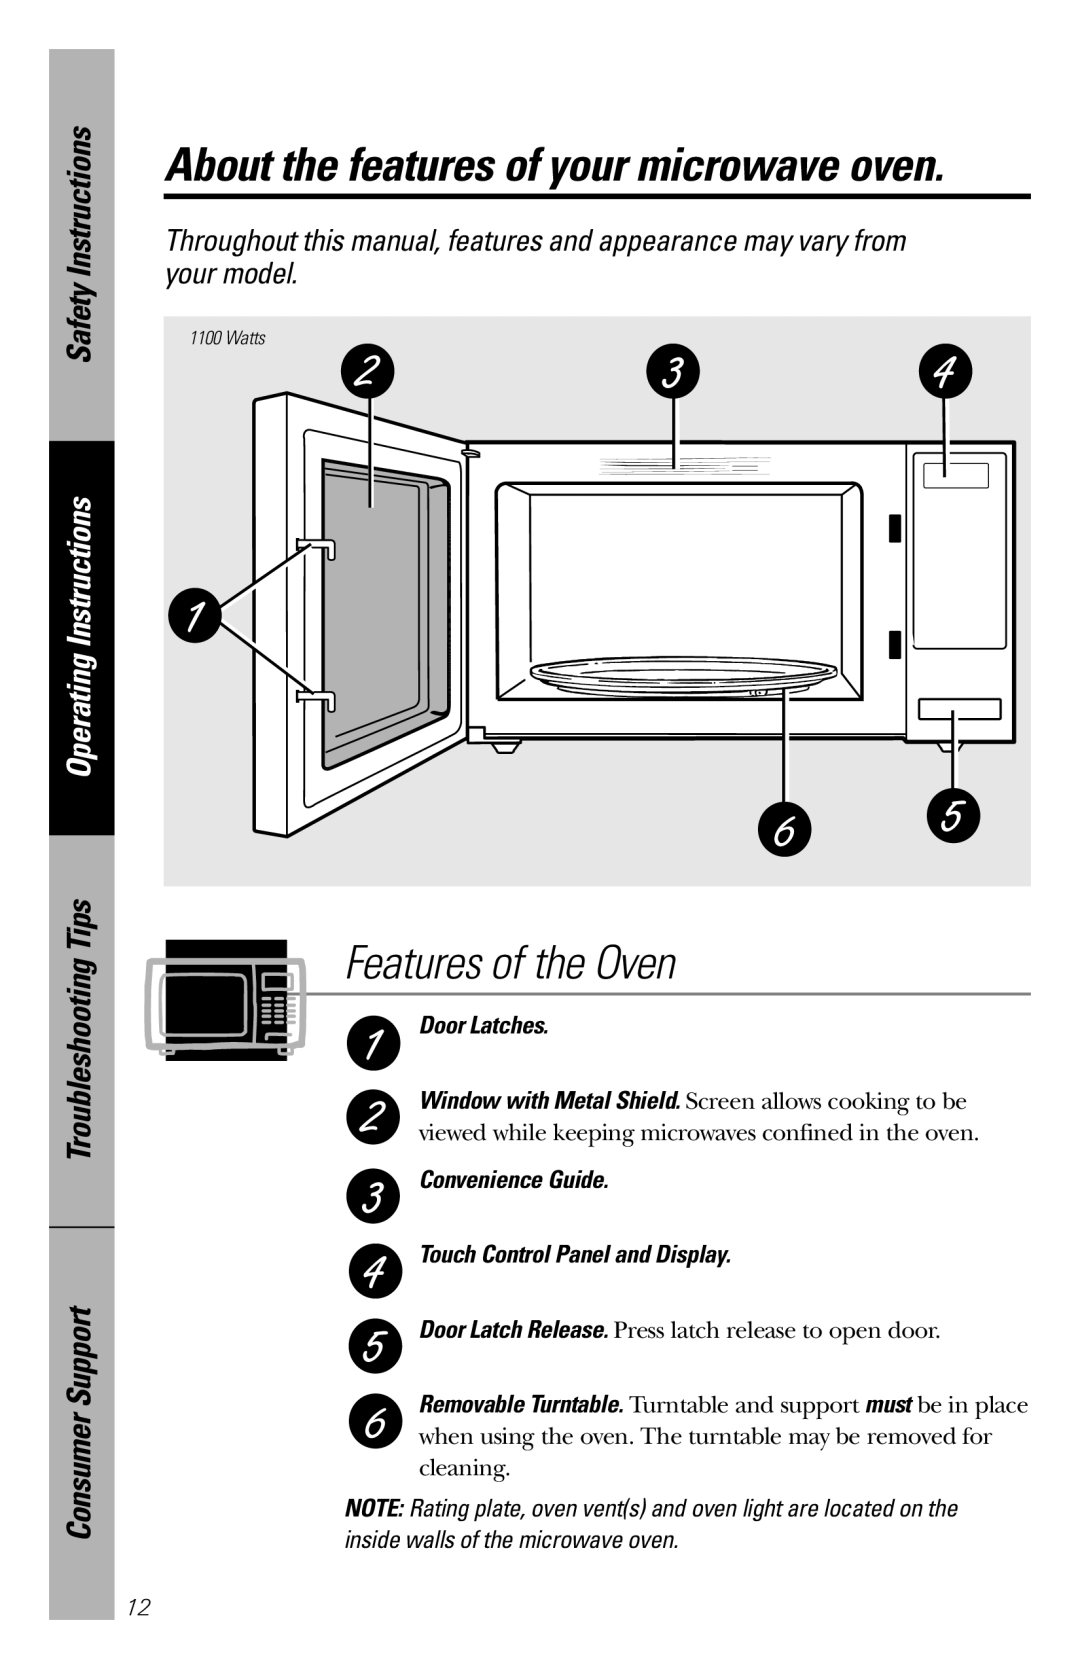 GE JES1456 Features of the Oven, About the features of your microwave oven, Safety Instructions, Operating Instructions 